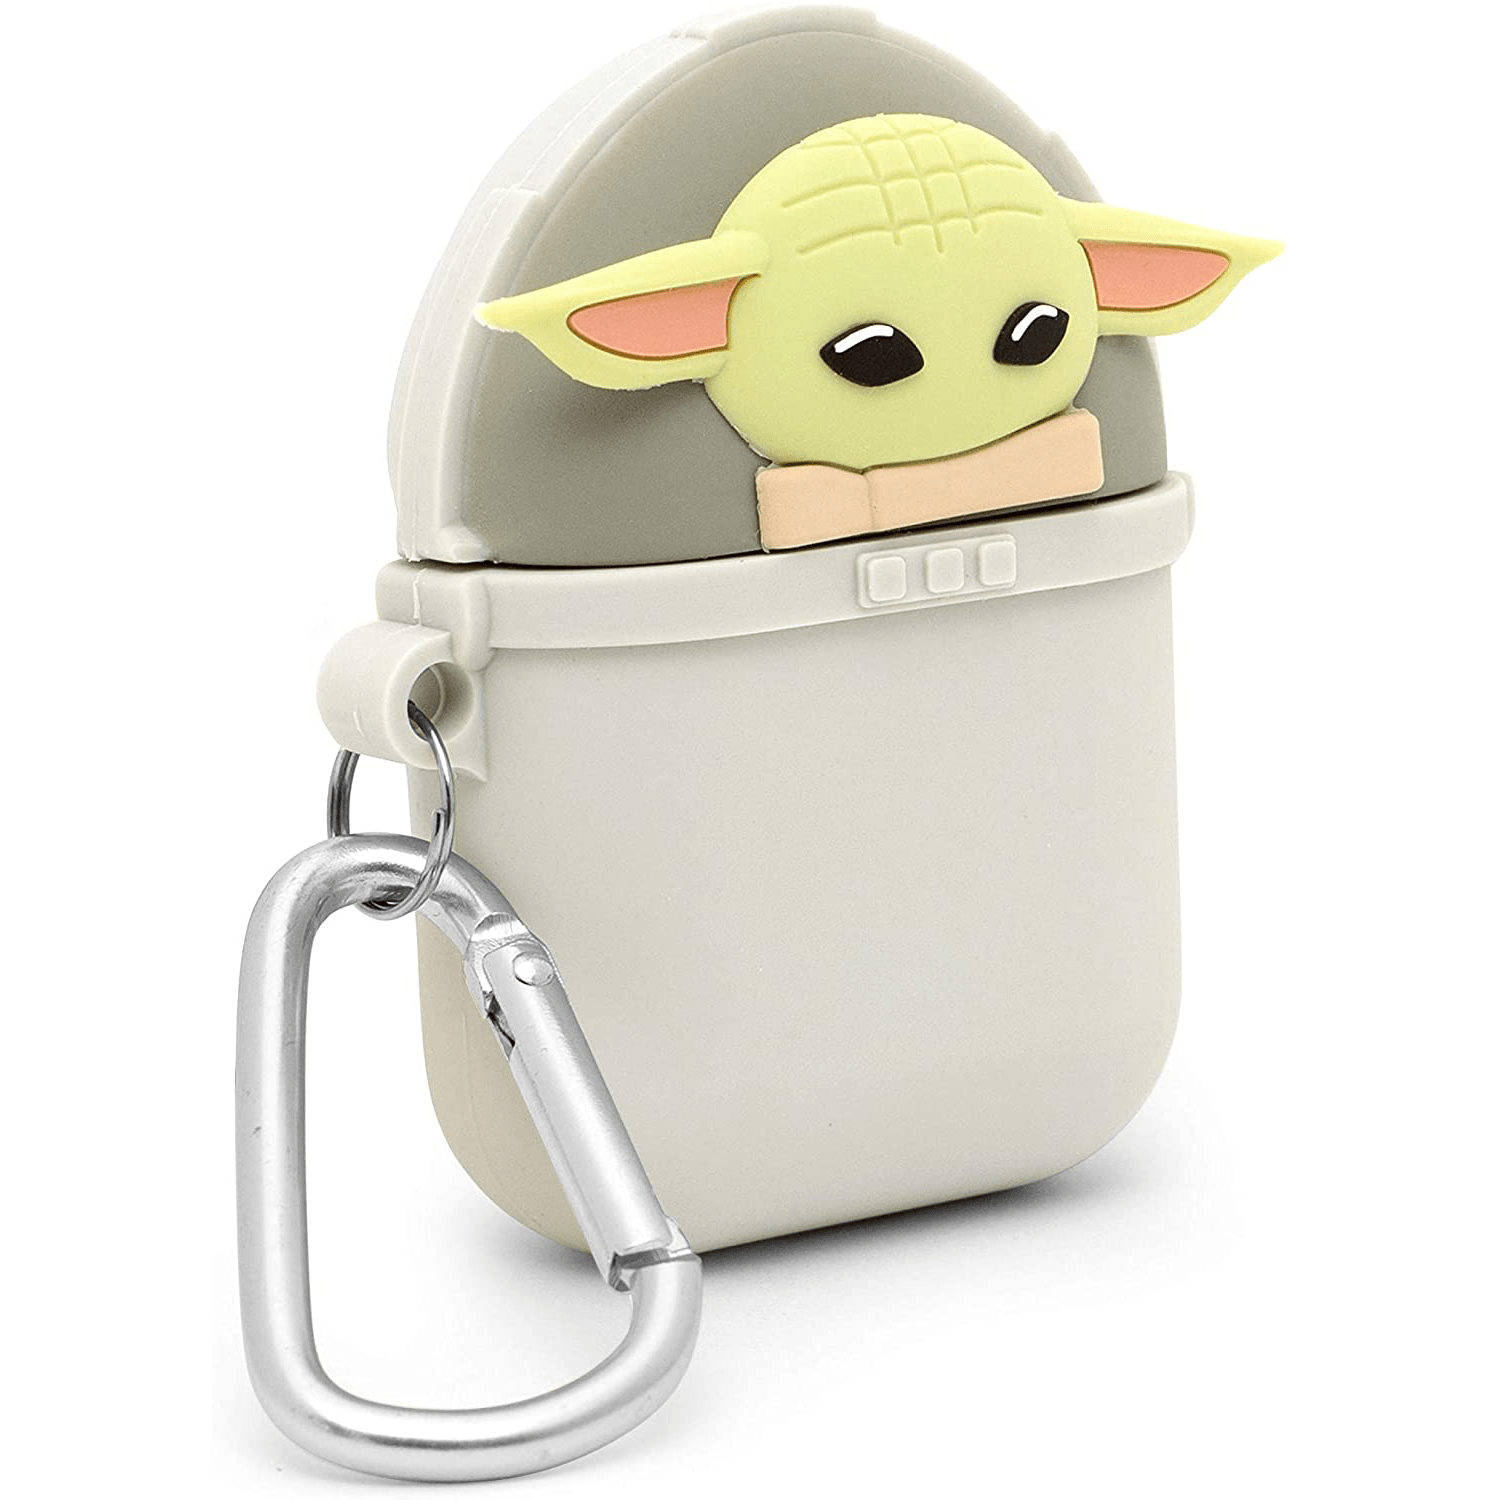 https://sunnygeeks.com/wp-content/uploads/2021/12/the-child-airpods-case-star-wars-mandalorian-2.png